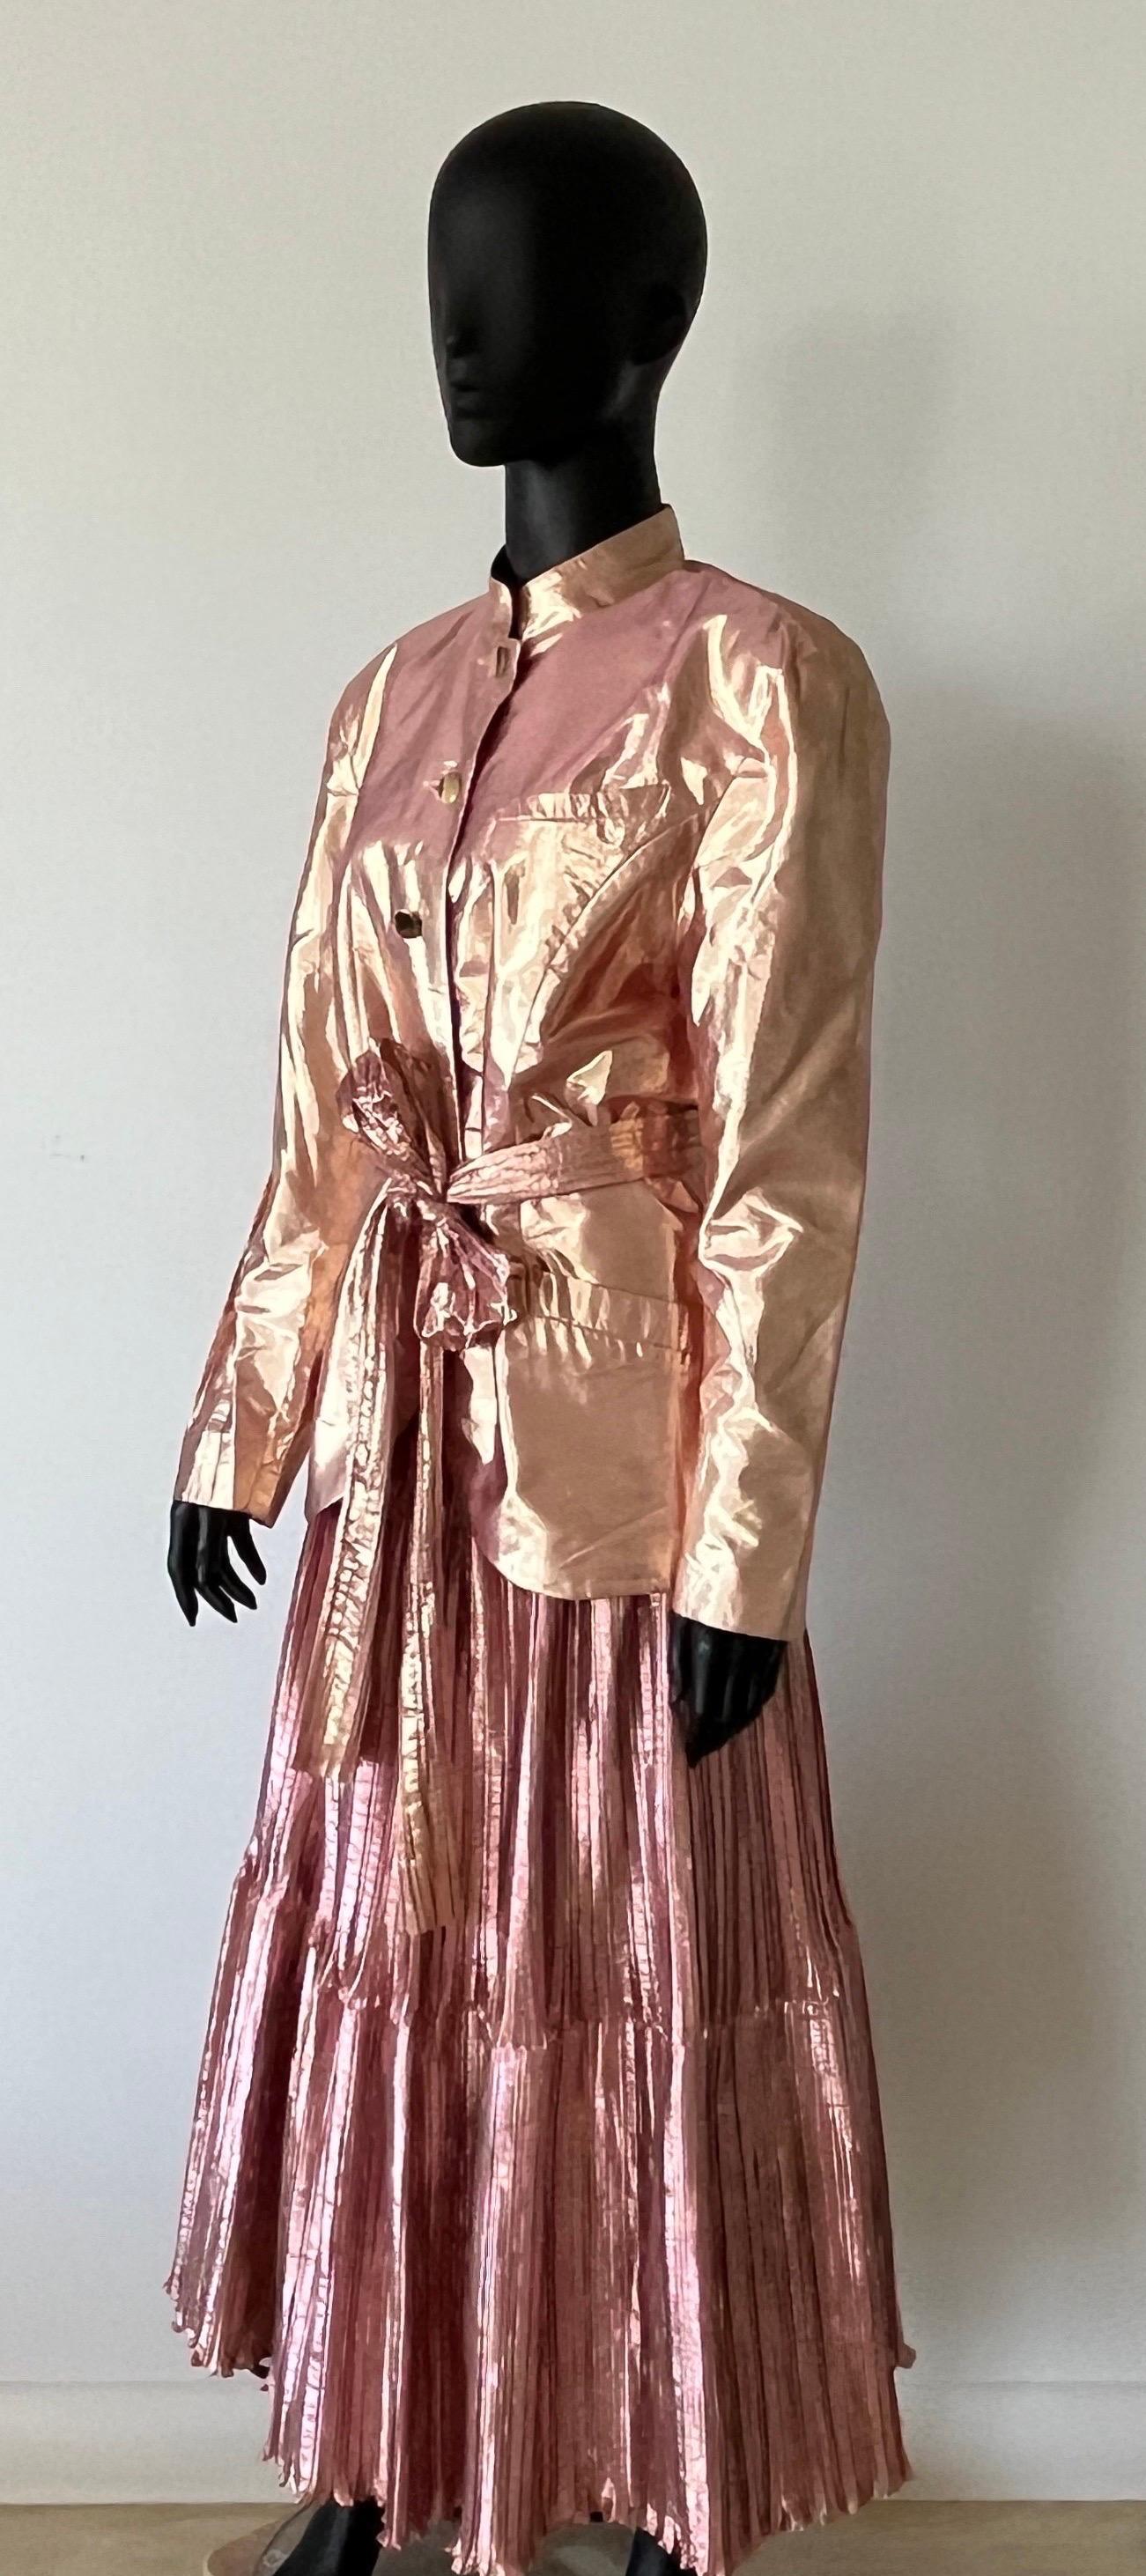 Amazing John Cavill metallic plisse 4 piece suit comprising of jacket over full length matching fabric skirt with net petticoat and belt makes this a stand out outfit.

An eye catching and extraordinary outfit for any event

A special suit from this